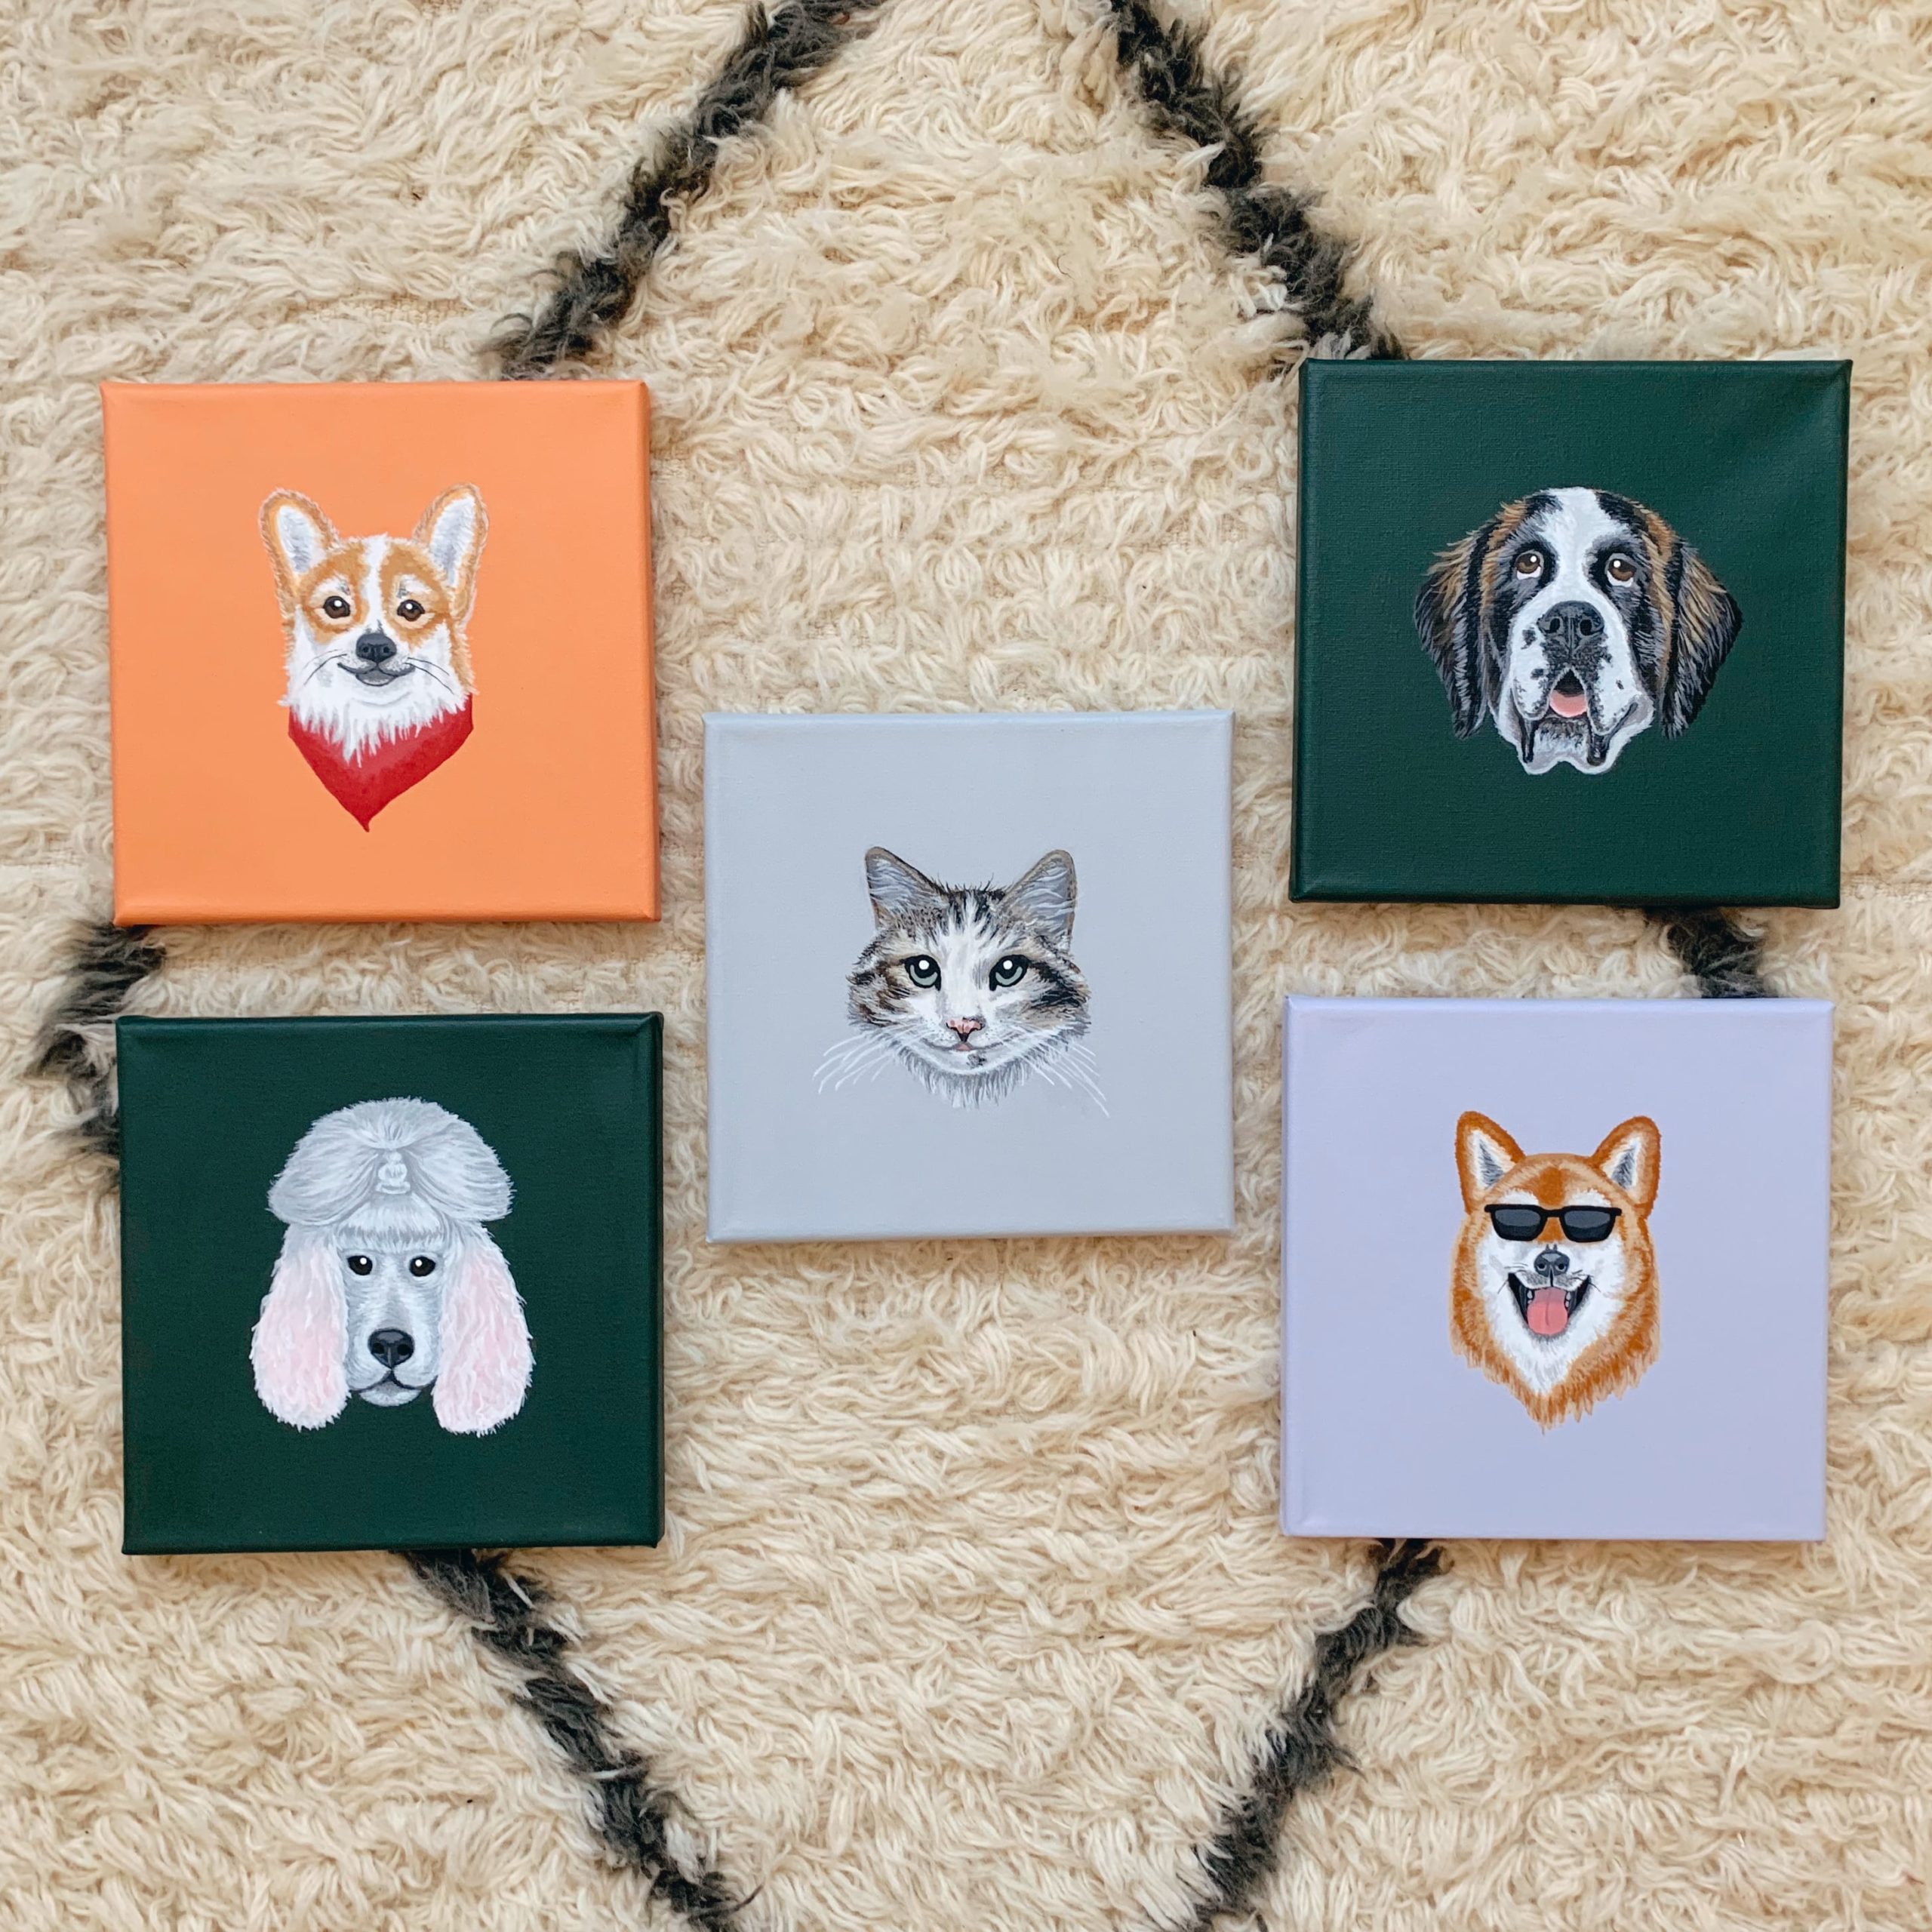 Handpainted pet portraits by Tayler Smith